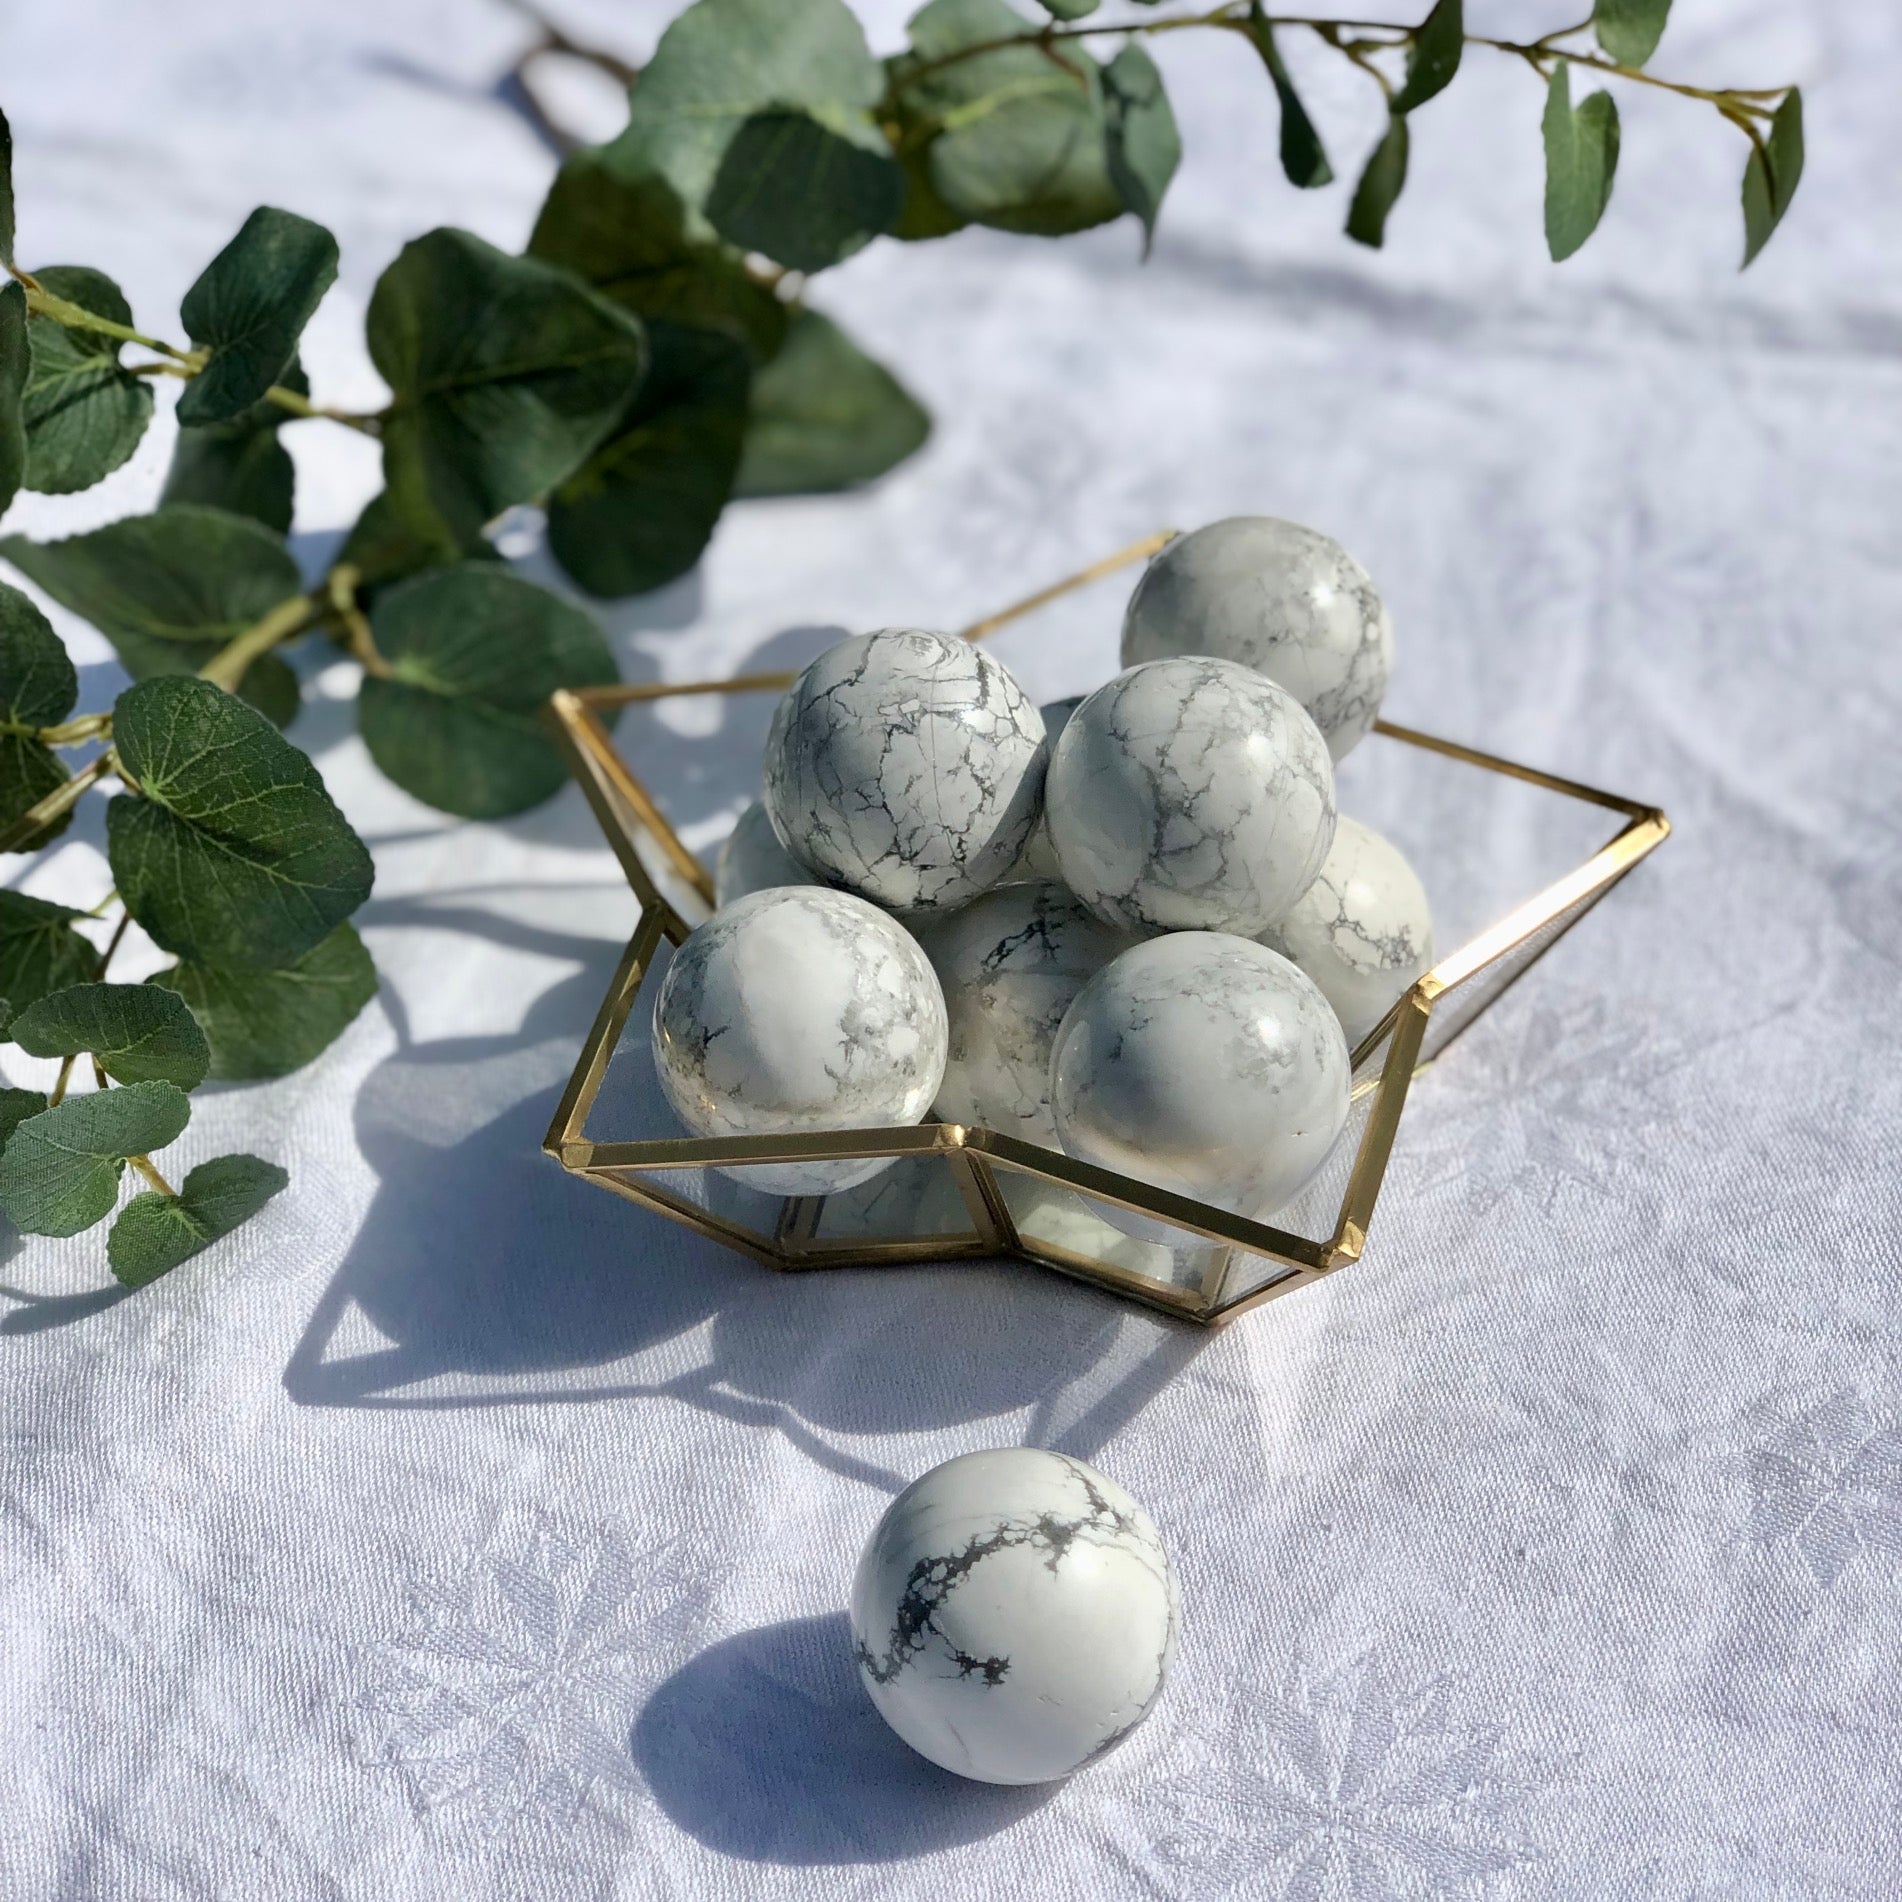 Star dish full of white and grey Howlite spheres